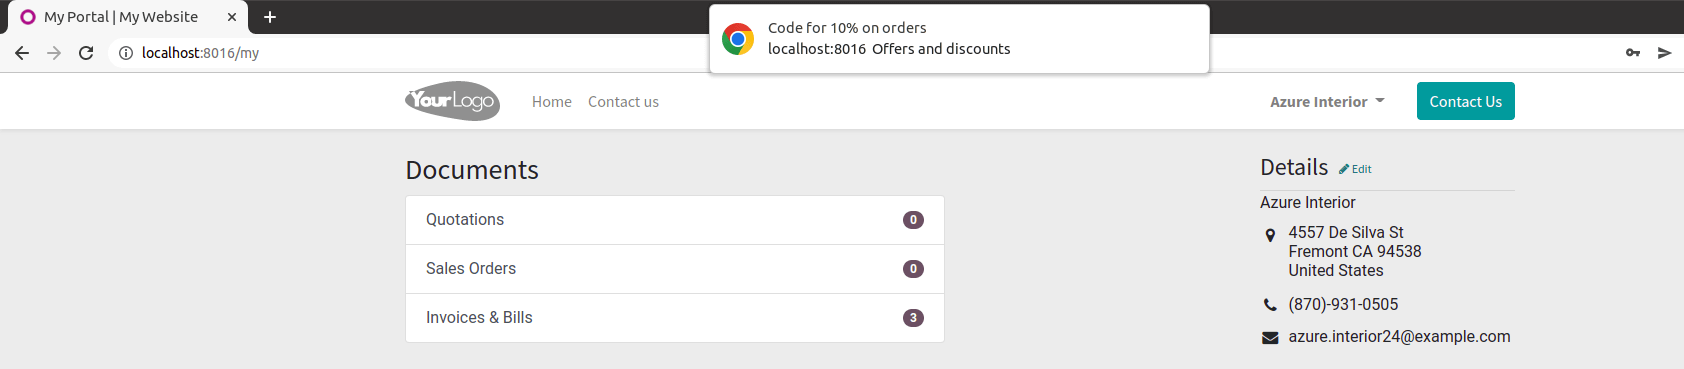 how-to-create-notification-for-portal-users-about-offers-discounts-in-odoo-15-cybrosys